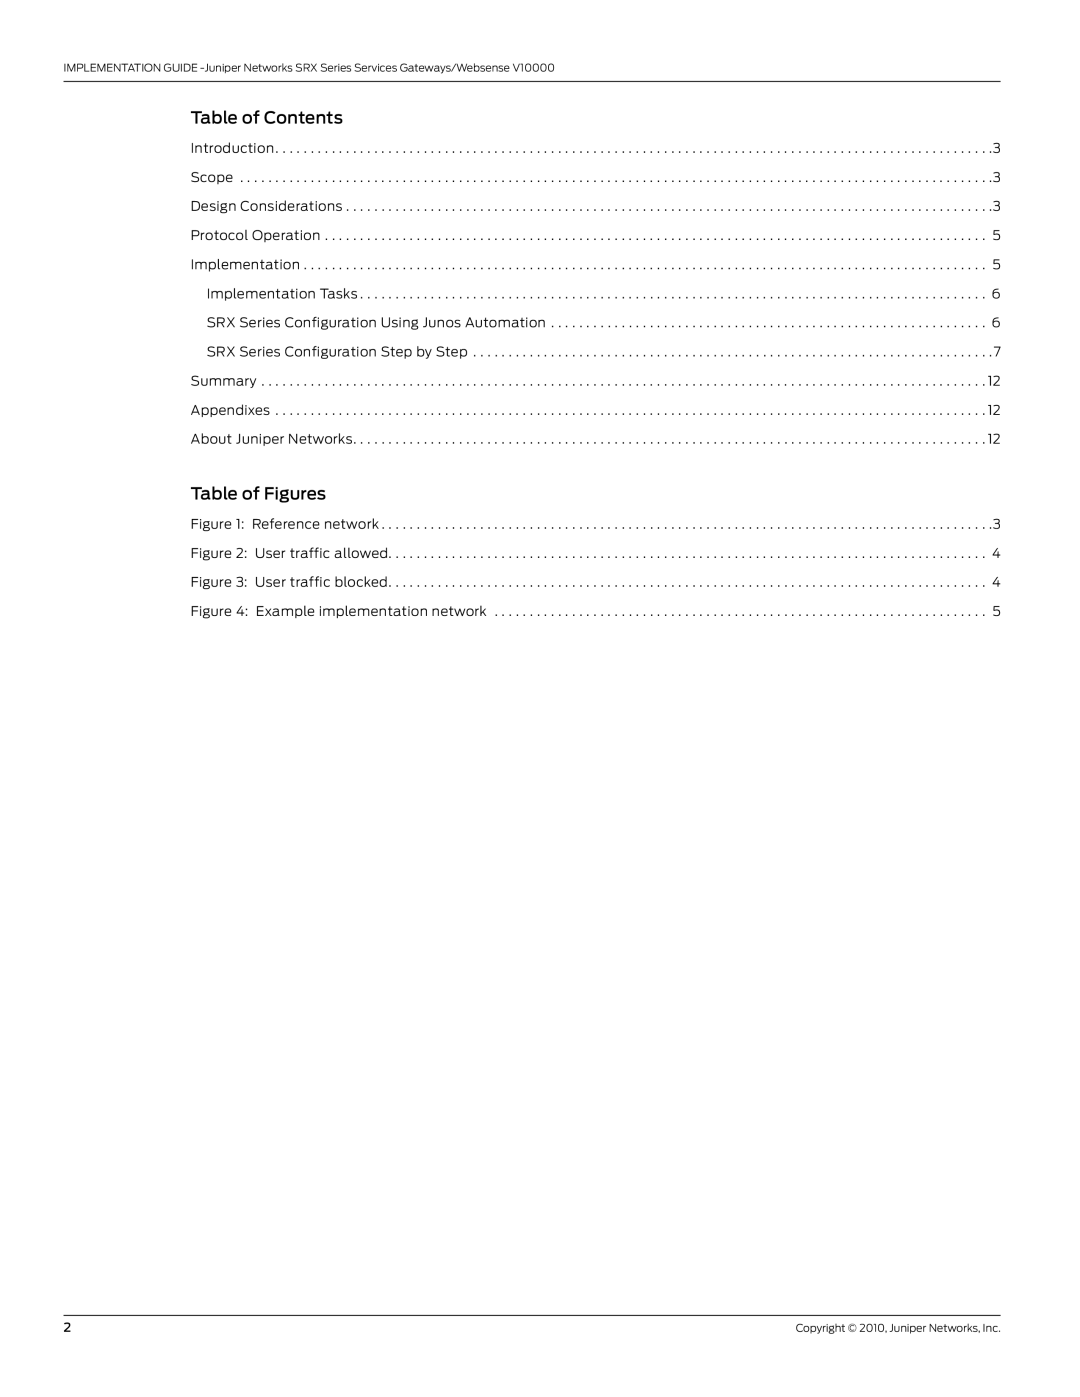 Juniper Networks V10000 warranty Table of Contents, Table of Figures 